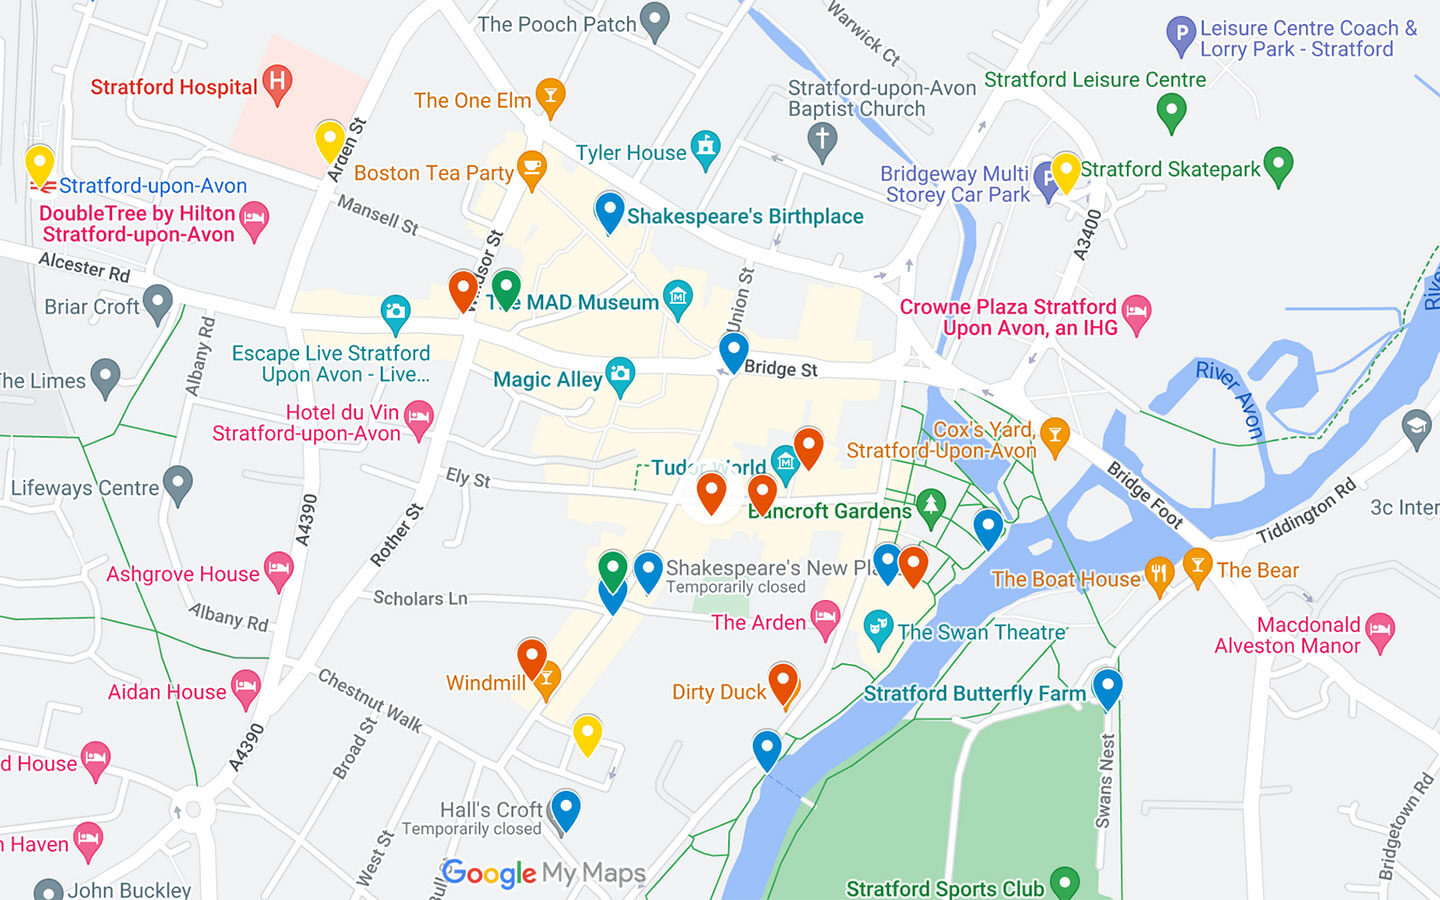 Map of things to do on a weekend in Stratford-upon-Avon